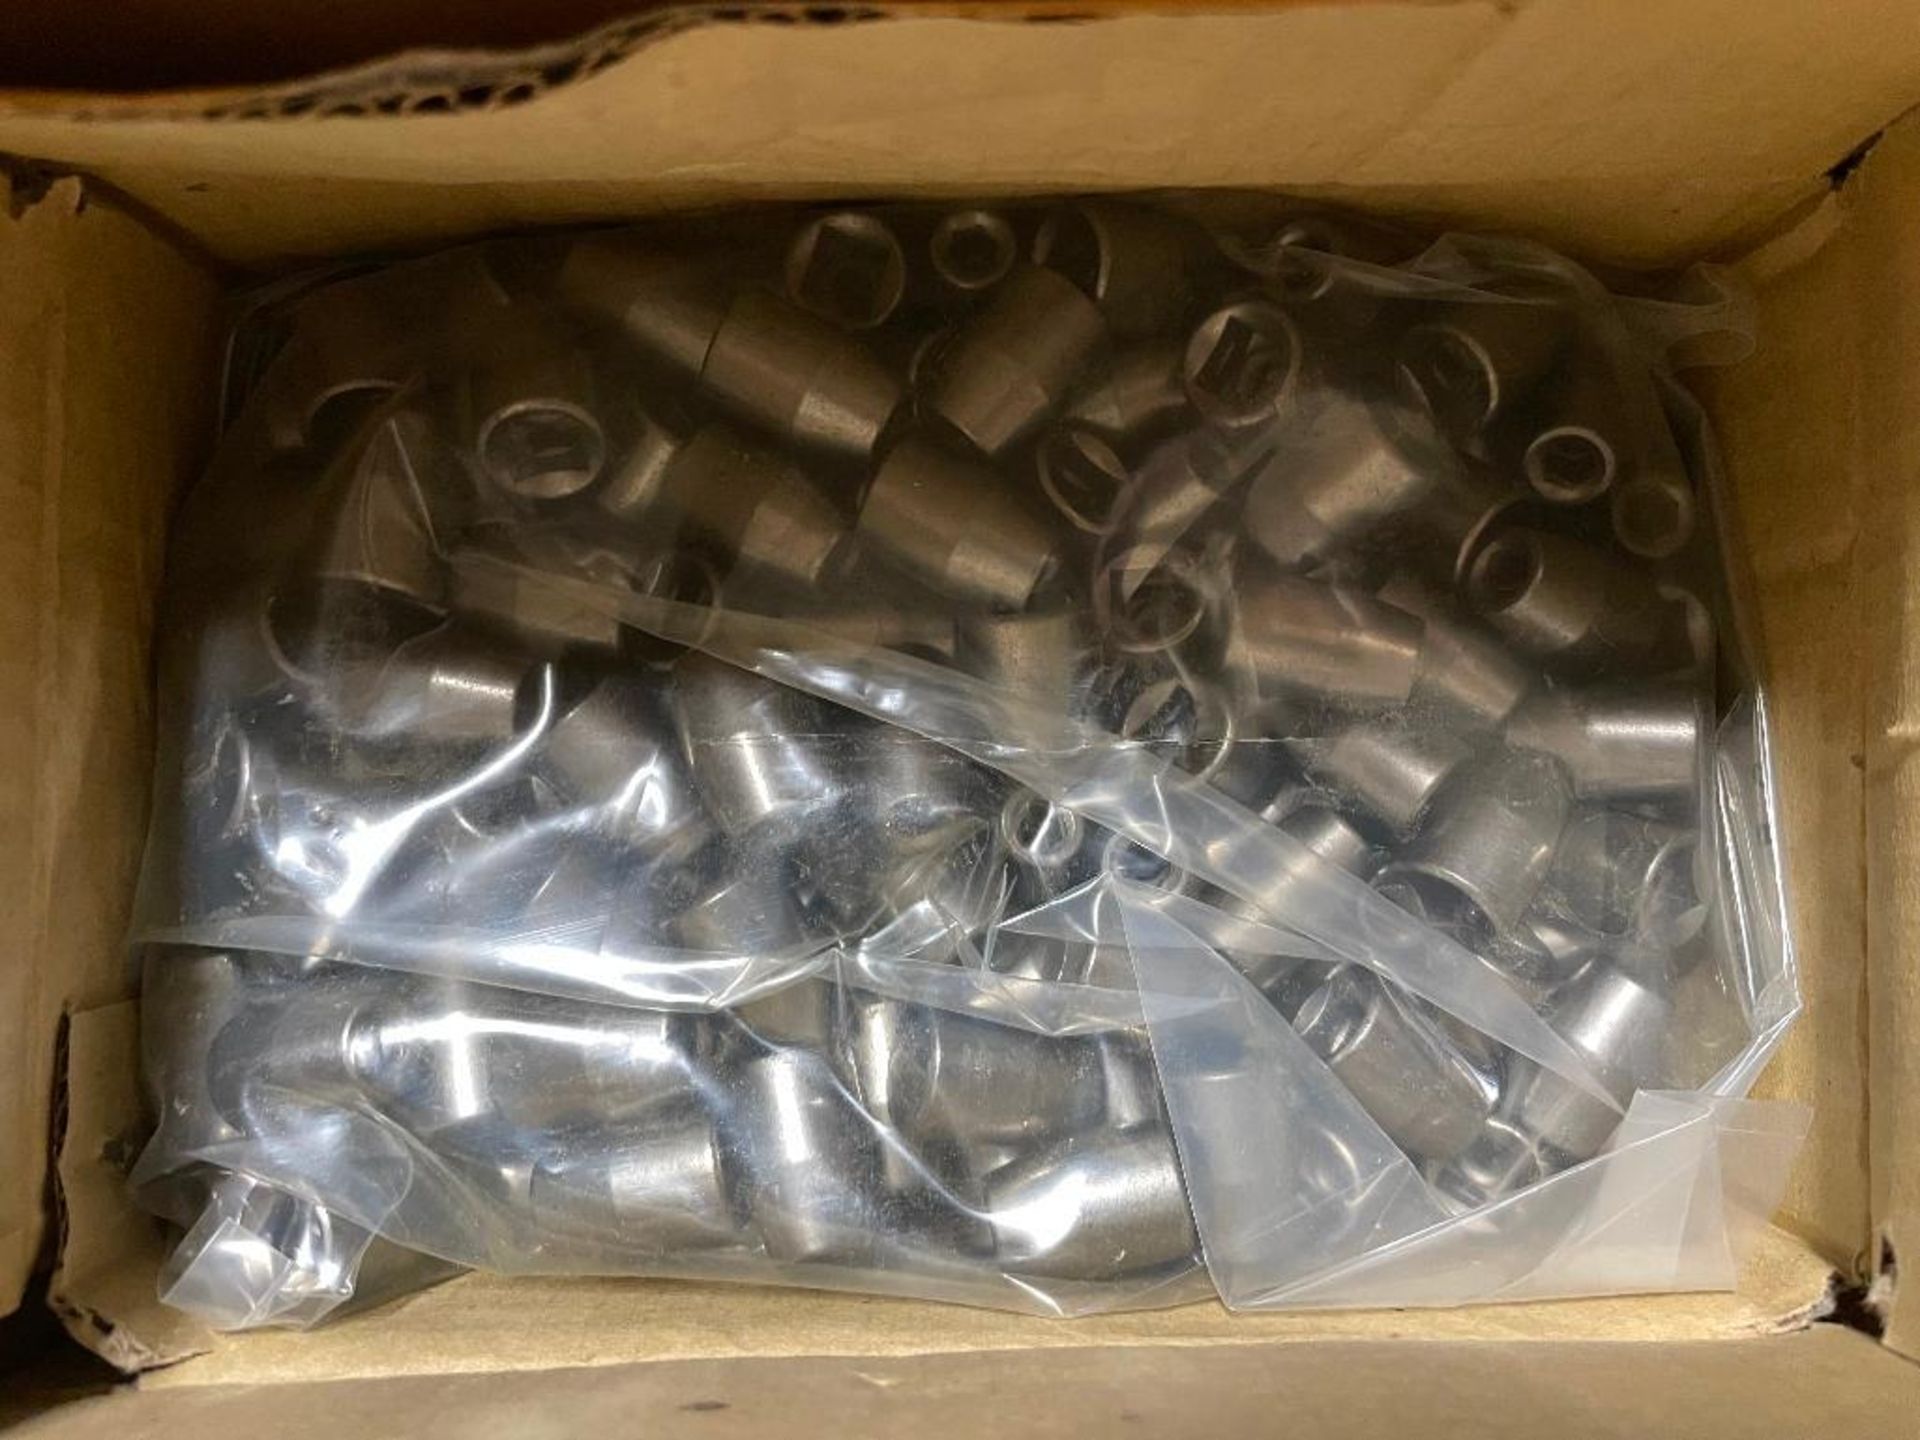 DESCRIPTION: (2) CASES OF 1/4" X 3/8" BIT HOLDERS. 600 PER CASE, 1200 IN LOT THIS LOT IS: ONE MONEY